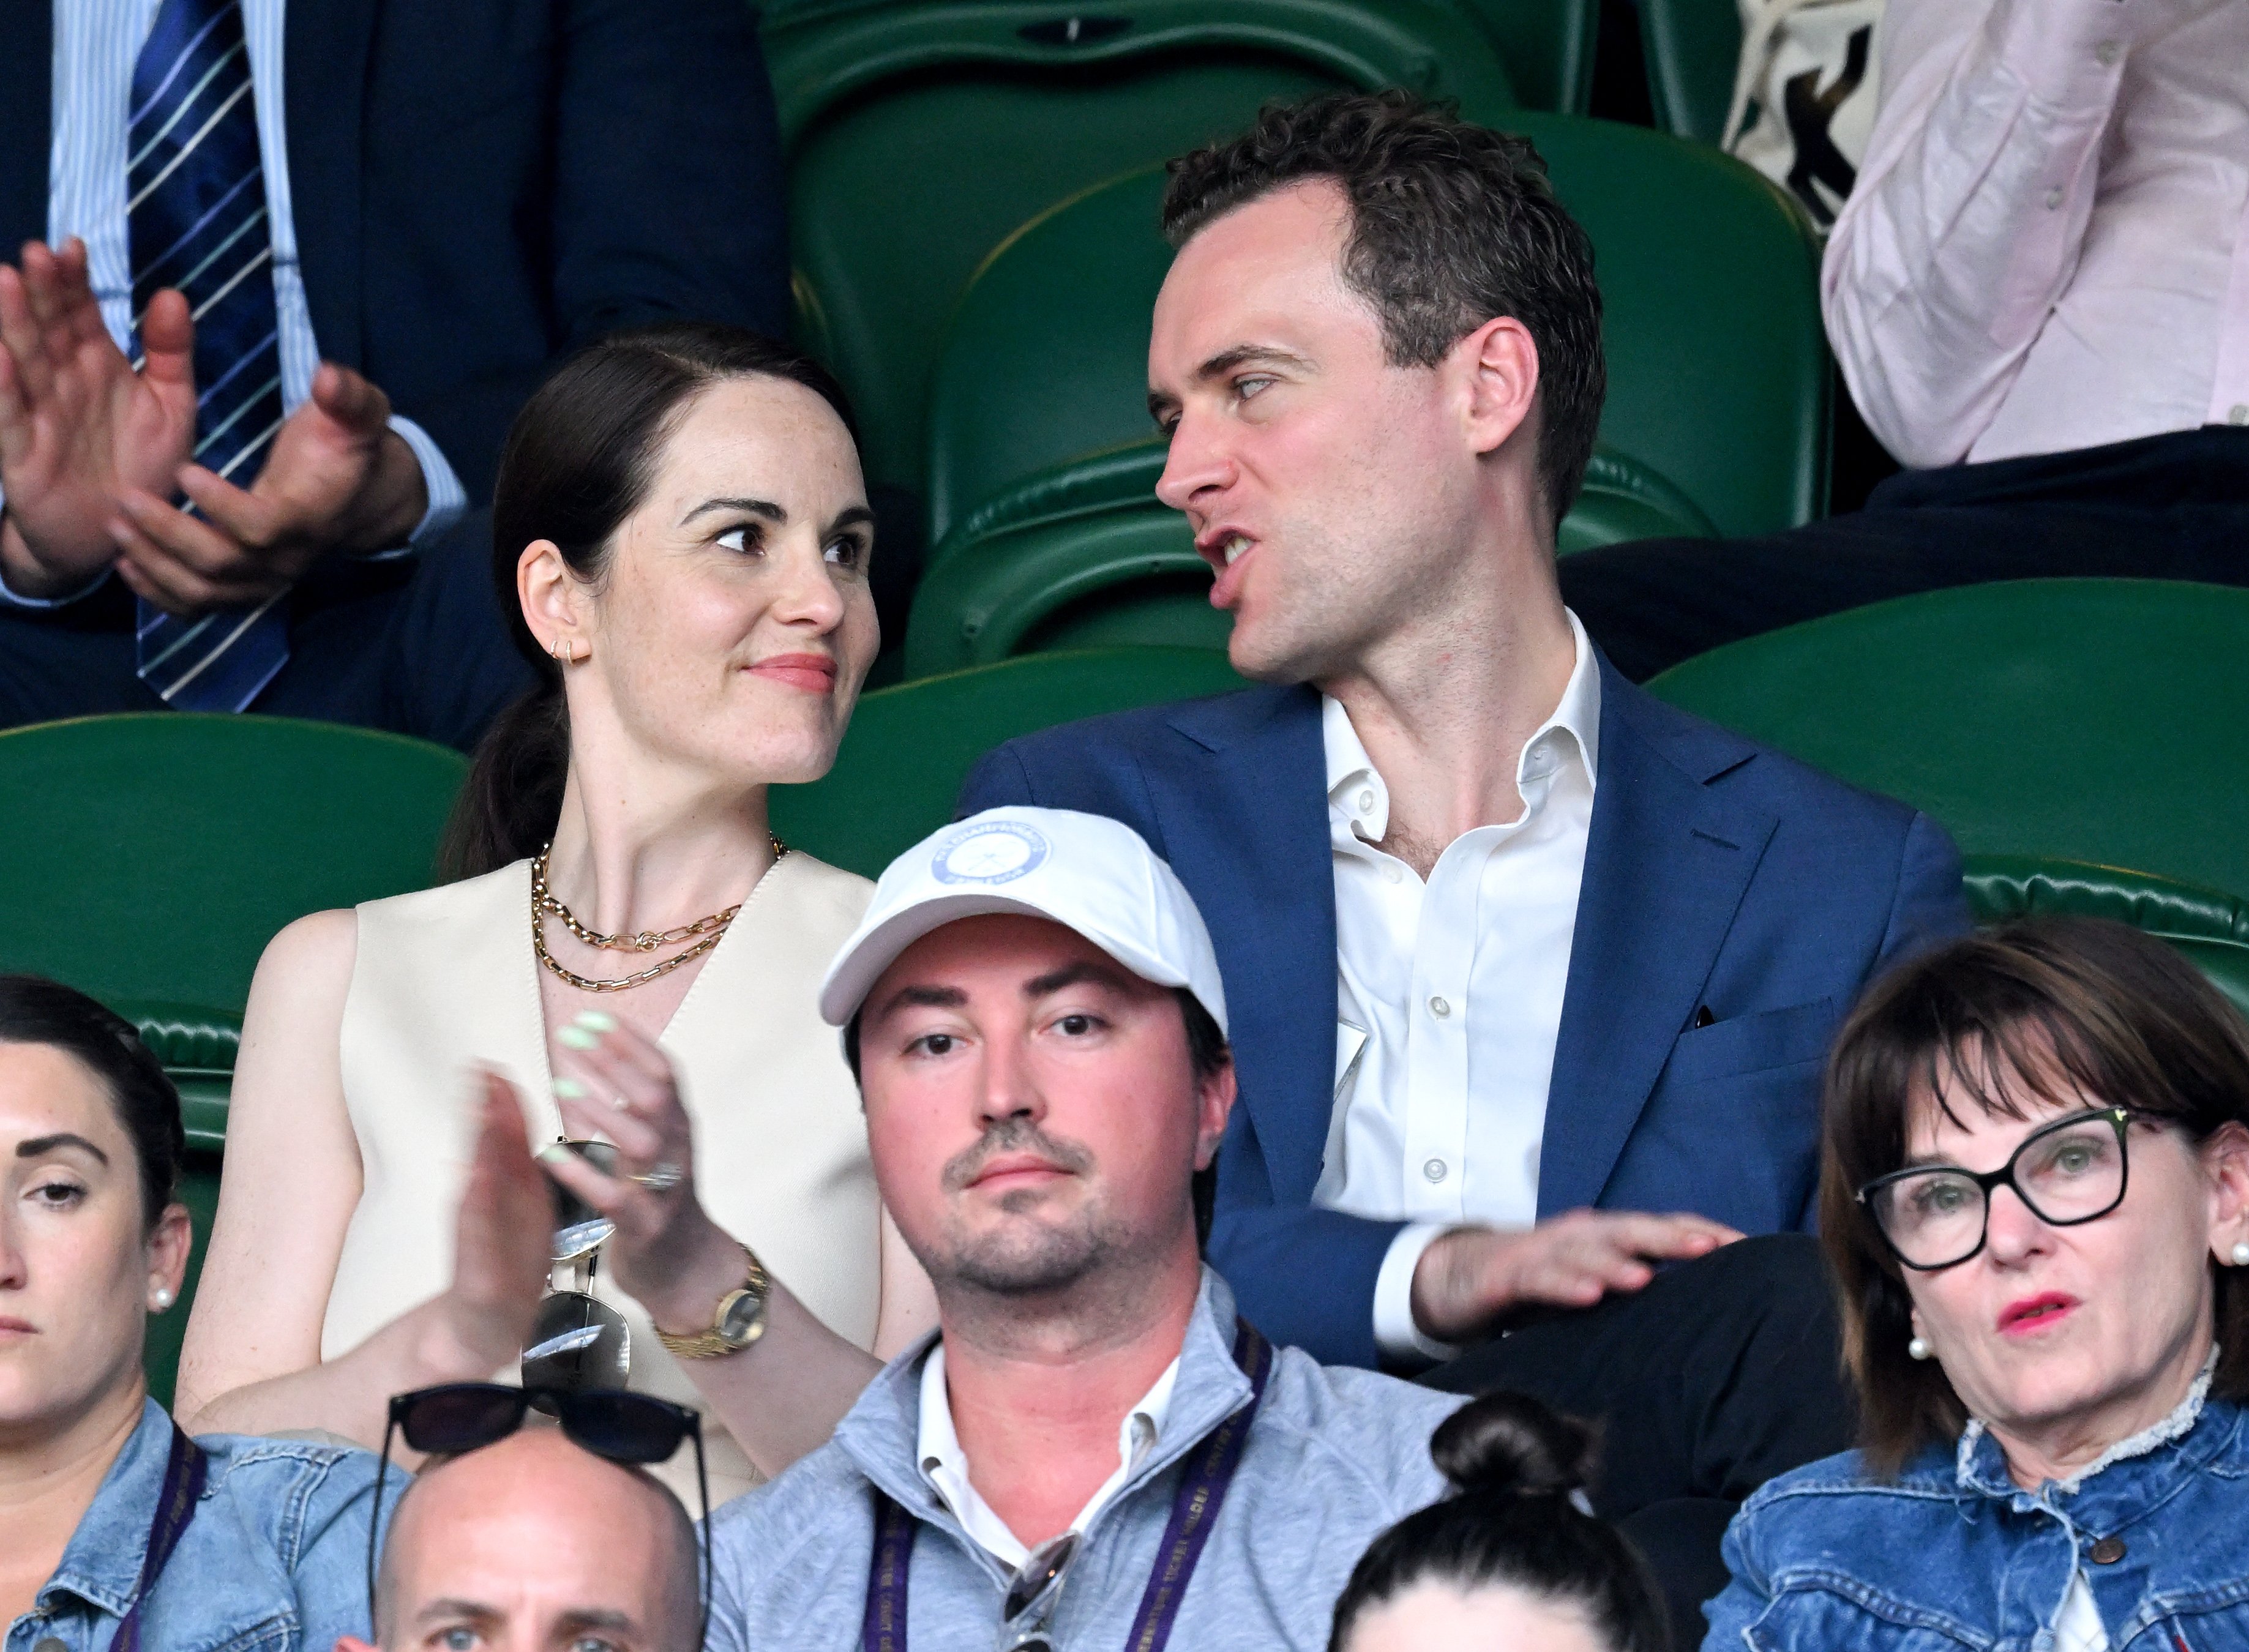 Michelle Dockery and Jasper Waller-Bridge attends Day 7 of the Wimbledon Tennis Championships at the All England Lawn Tennis and Croquet Club on July 3, 2022 in London, England. | Source: Getty Images